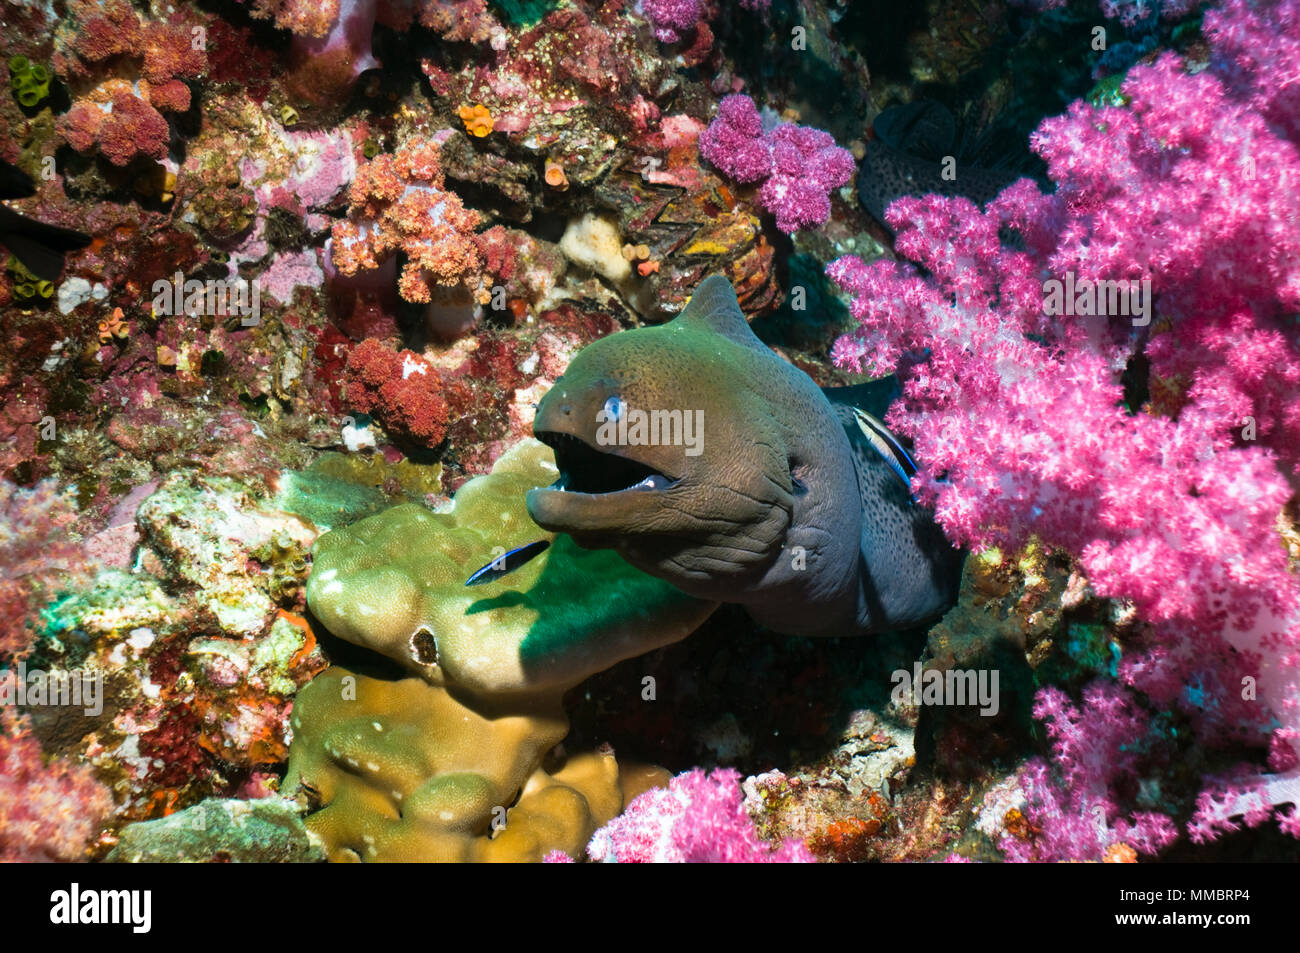 Giant moray (Gymnothorax javanicus) emerging from soft corals, being cleaned by Bluestreak cleaner wrasse. Andaman Sea, Thailand. Stock Photo